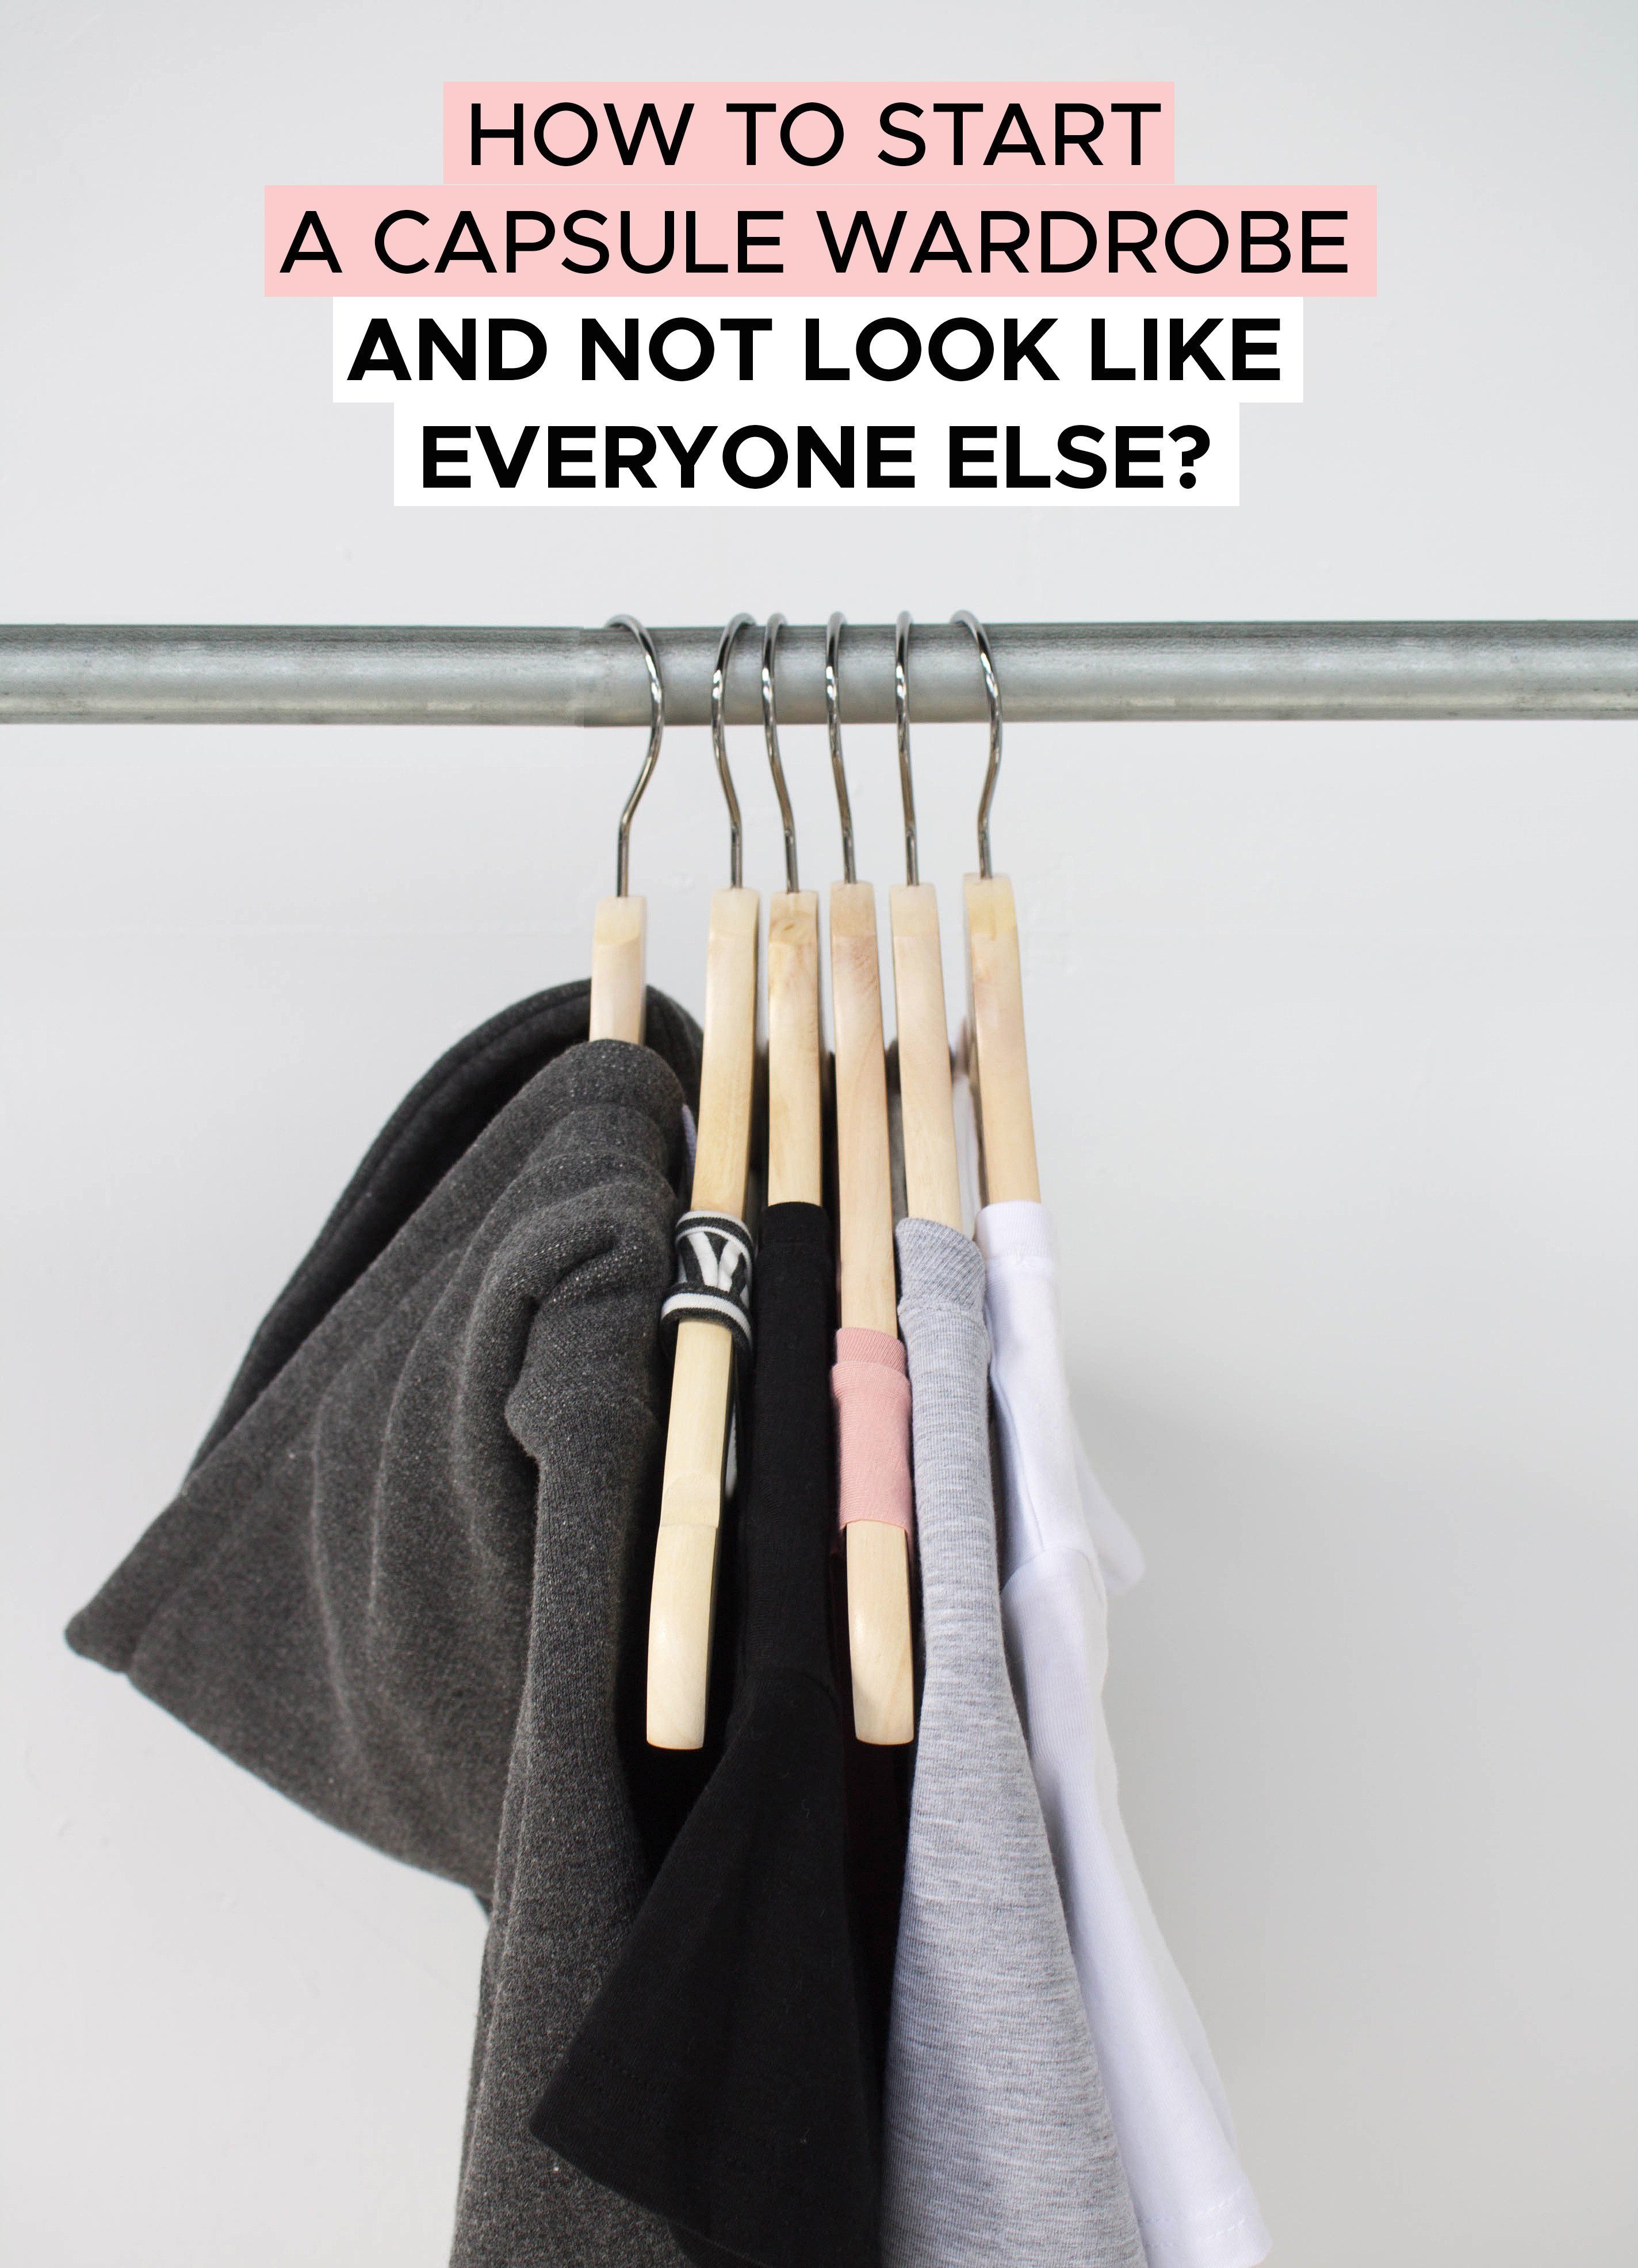 The Simple and Easy Way To Start A Capsule Wardrobe And Not Look Like Everyone Else - FRANC